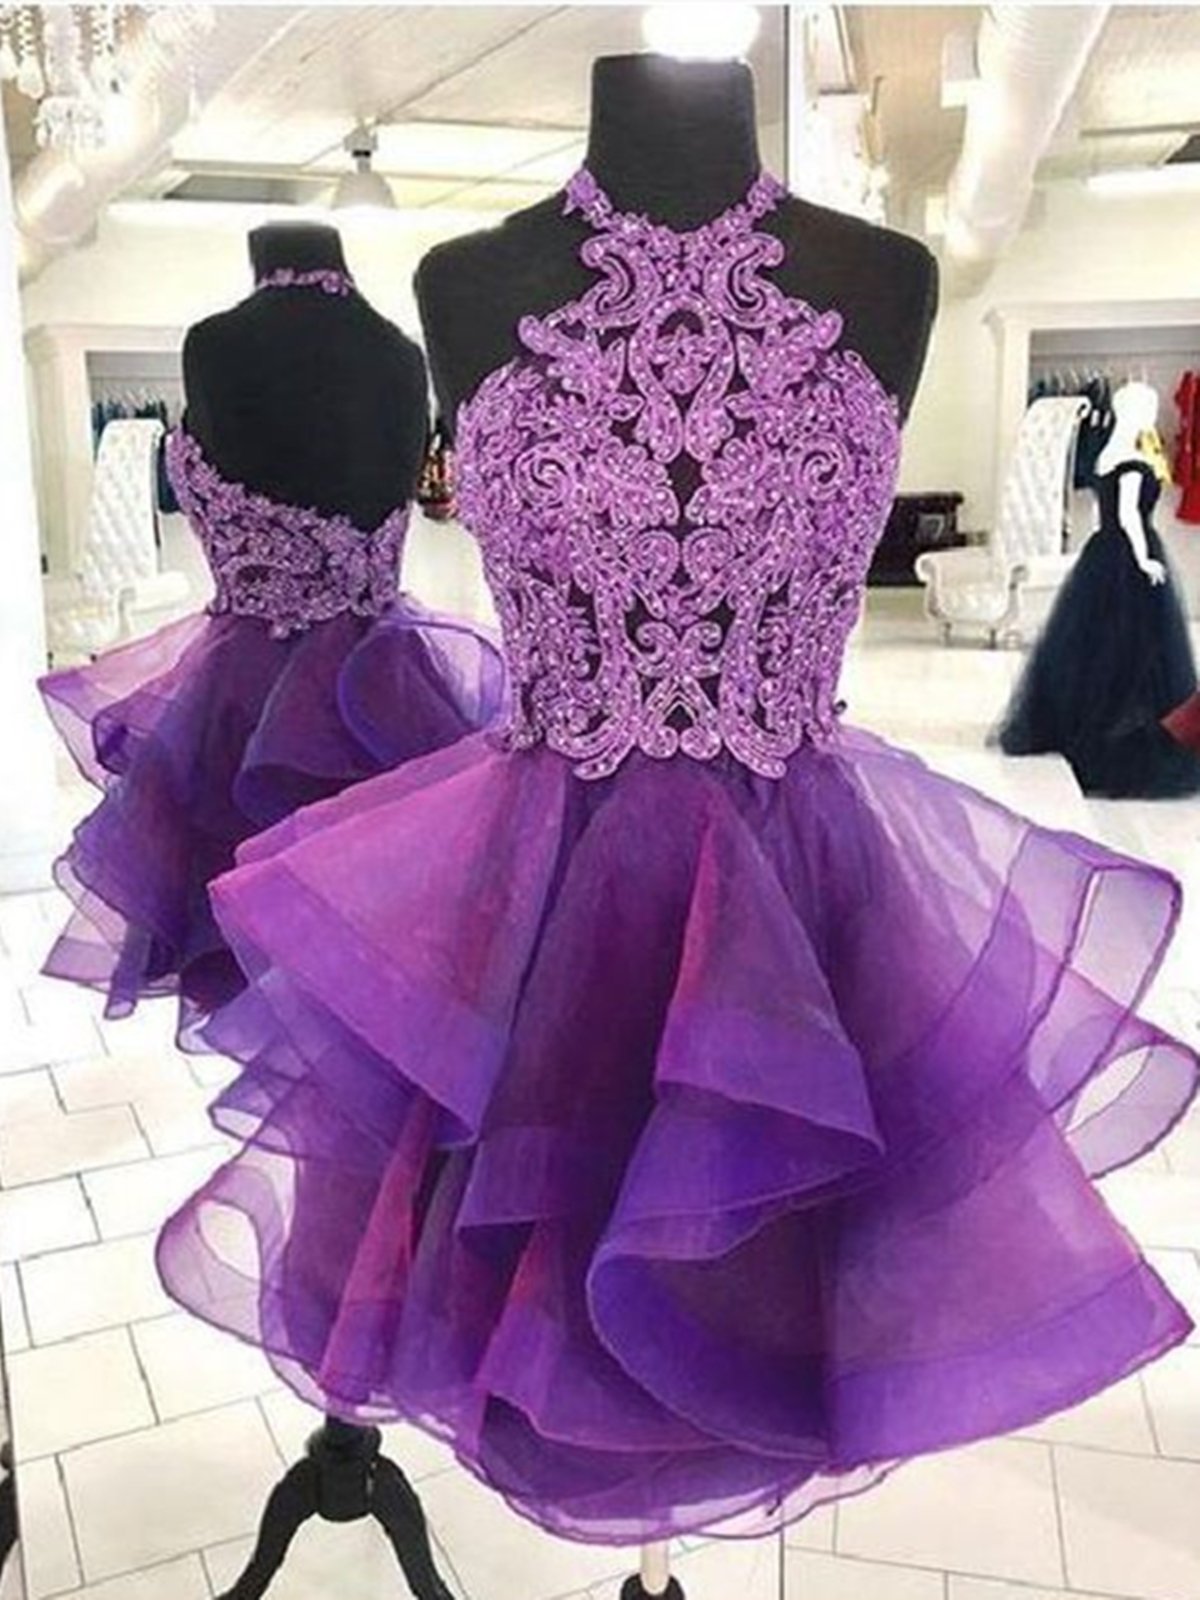 Short Backless Purple Organza Lace Corset Prom Dresses, Short Purple Lace Corset Formal Corset Homecoming Dresses outfit, Party Dress